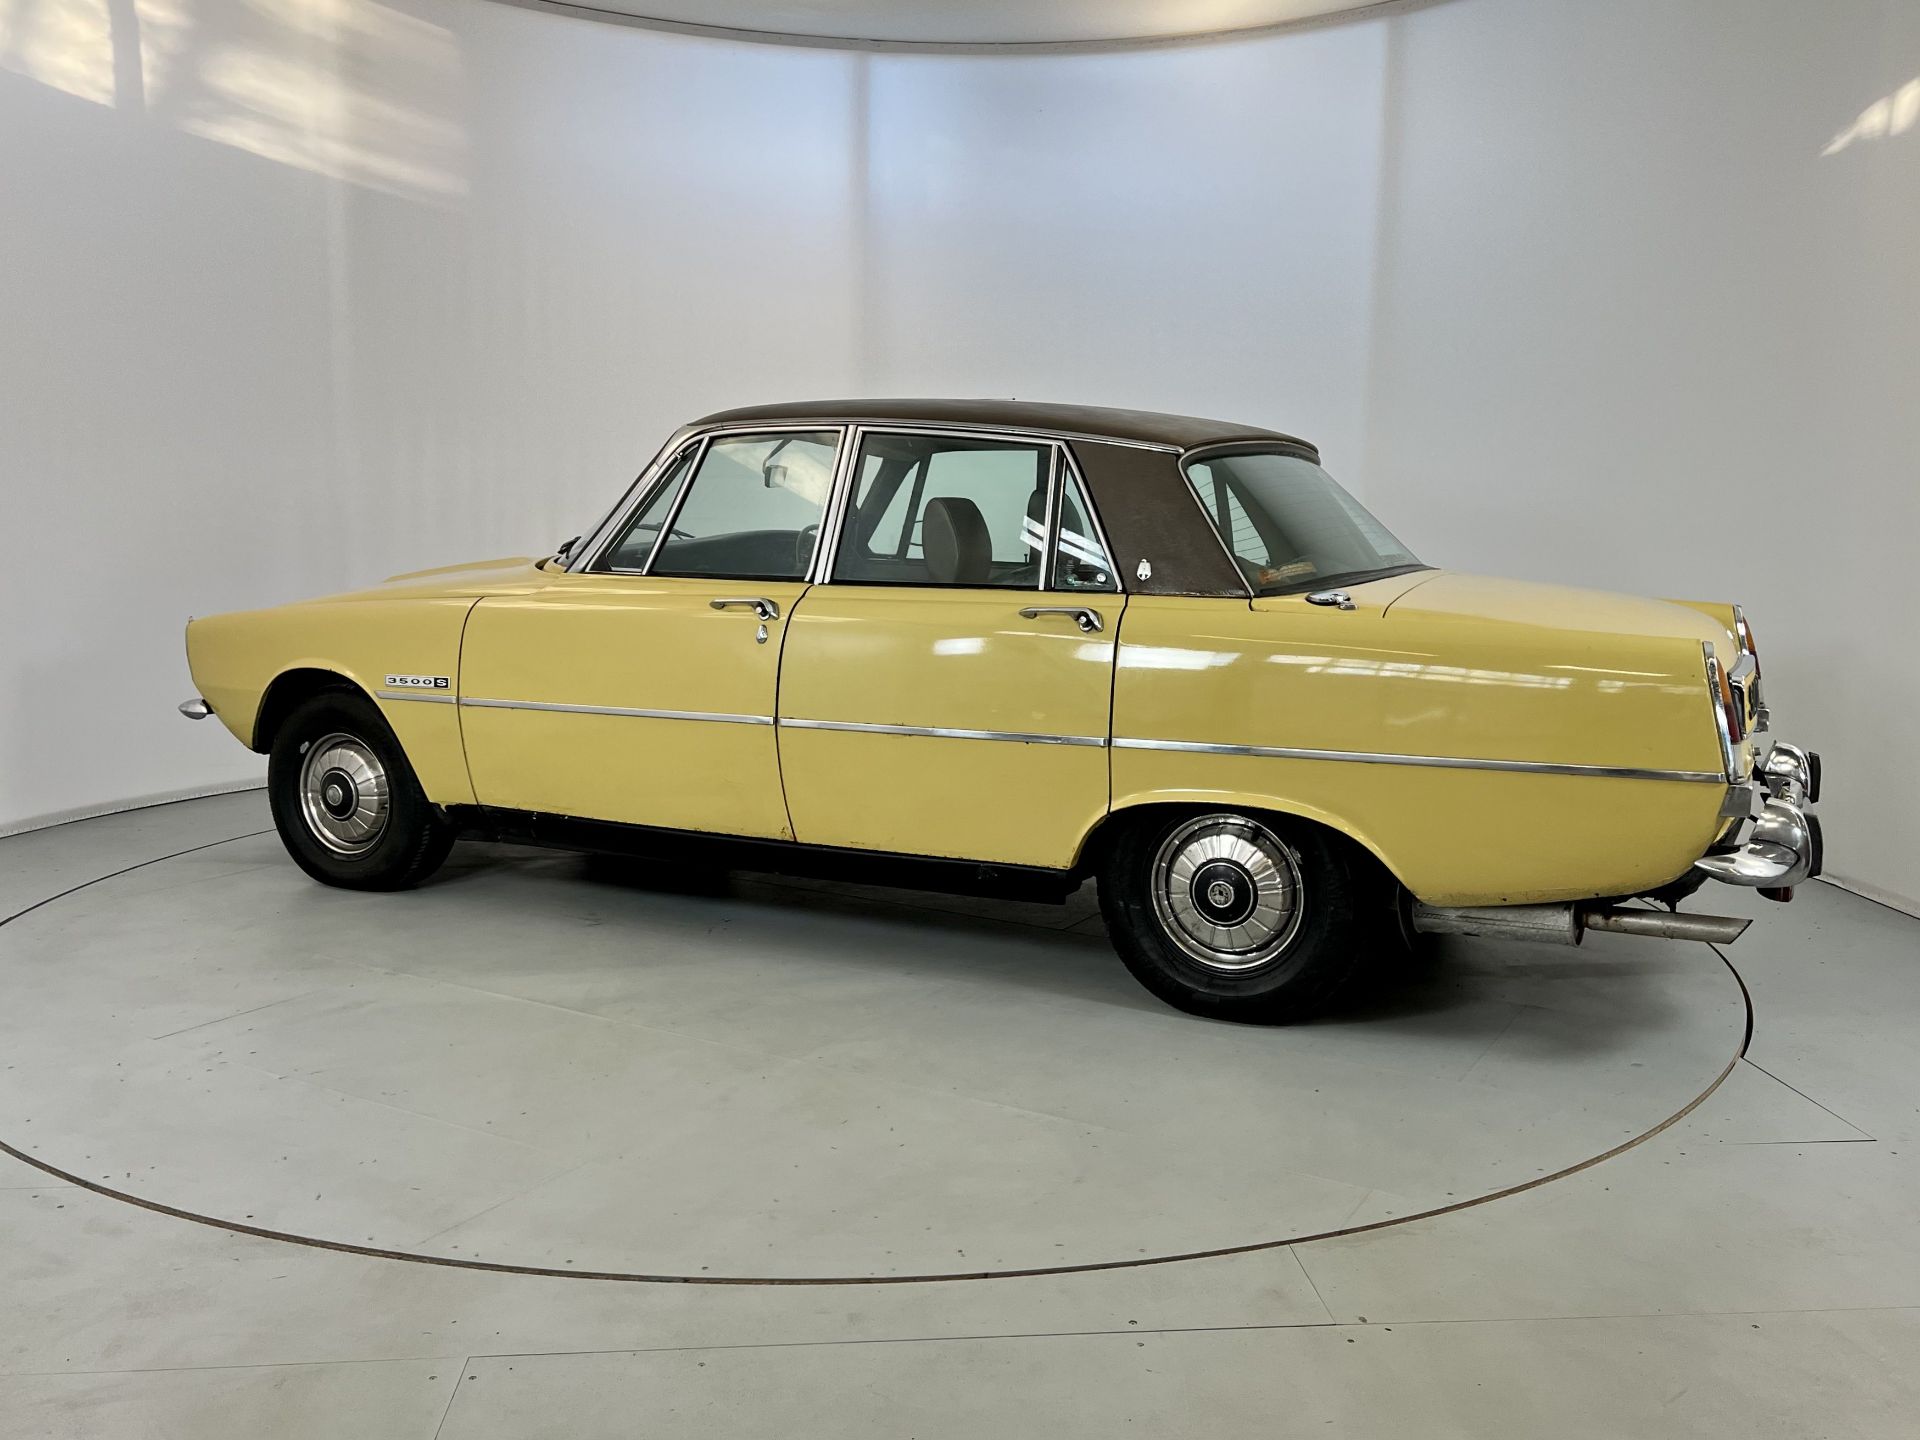 Rover 3500 S - Image 6 of 30